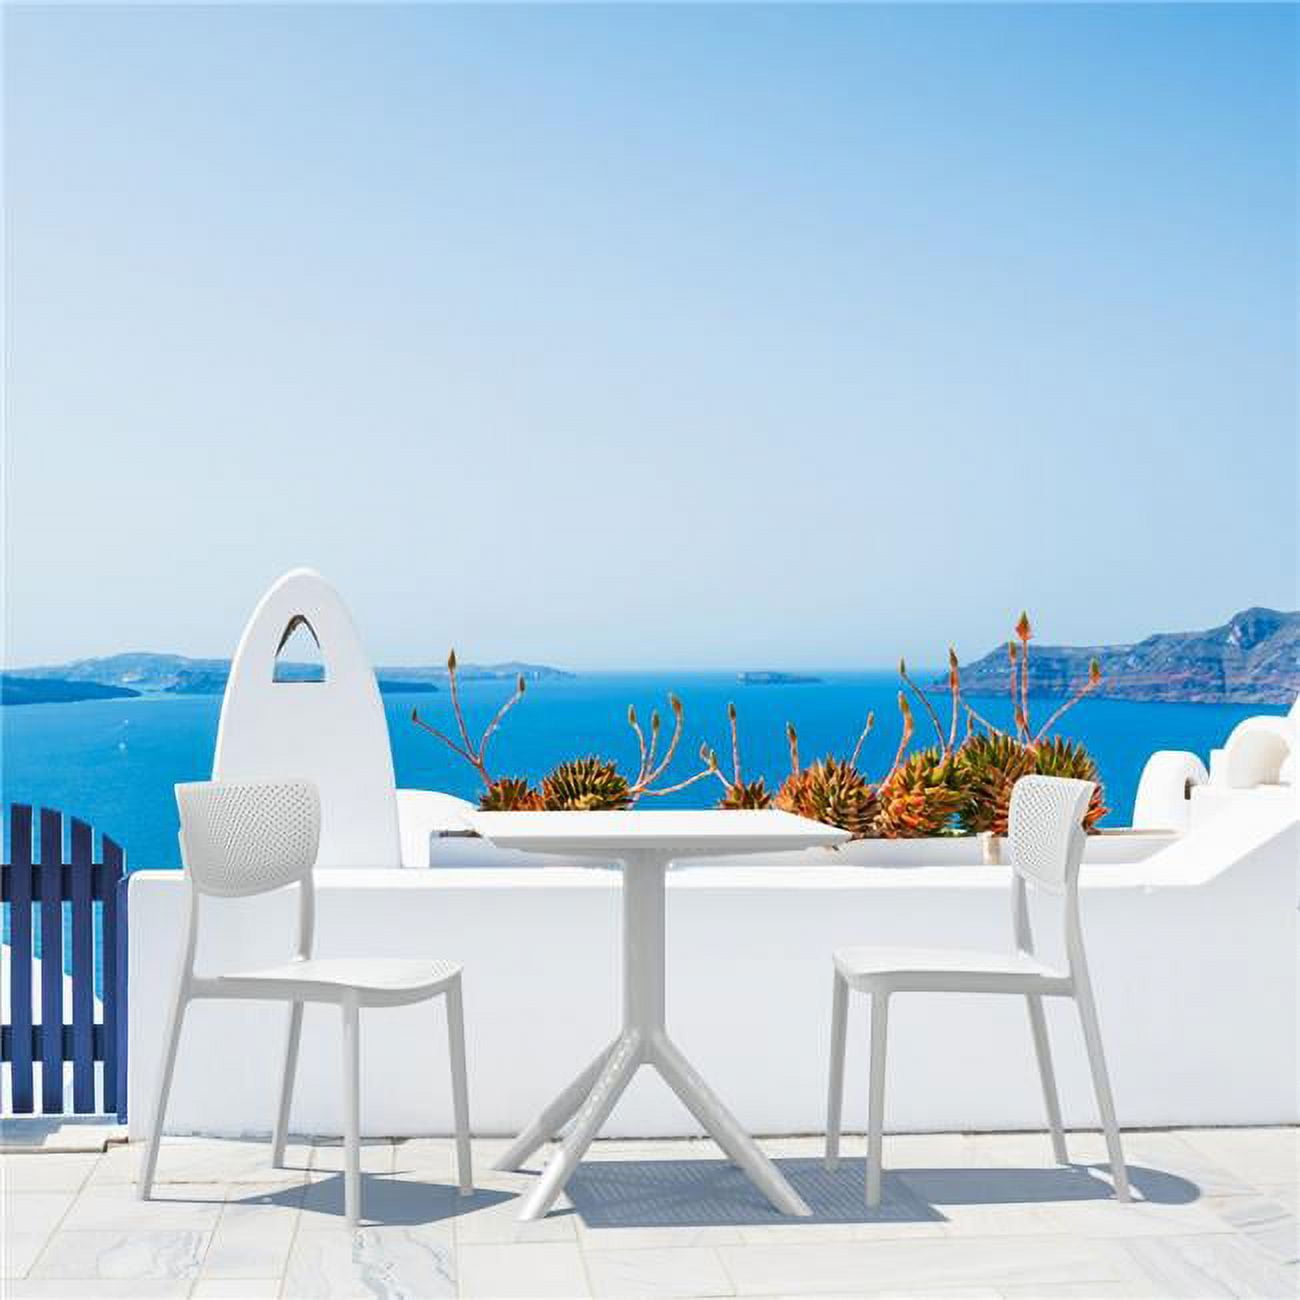 Isp1292s-whi Lucy Outdoor Bistro Set With 27 In. Table Top, White - 3 Piece